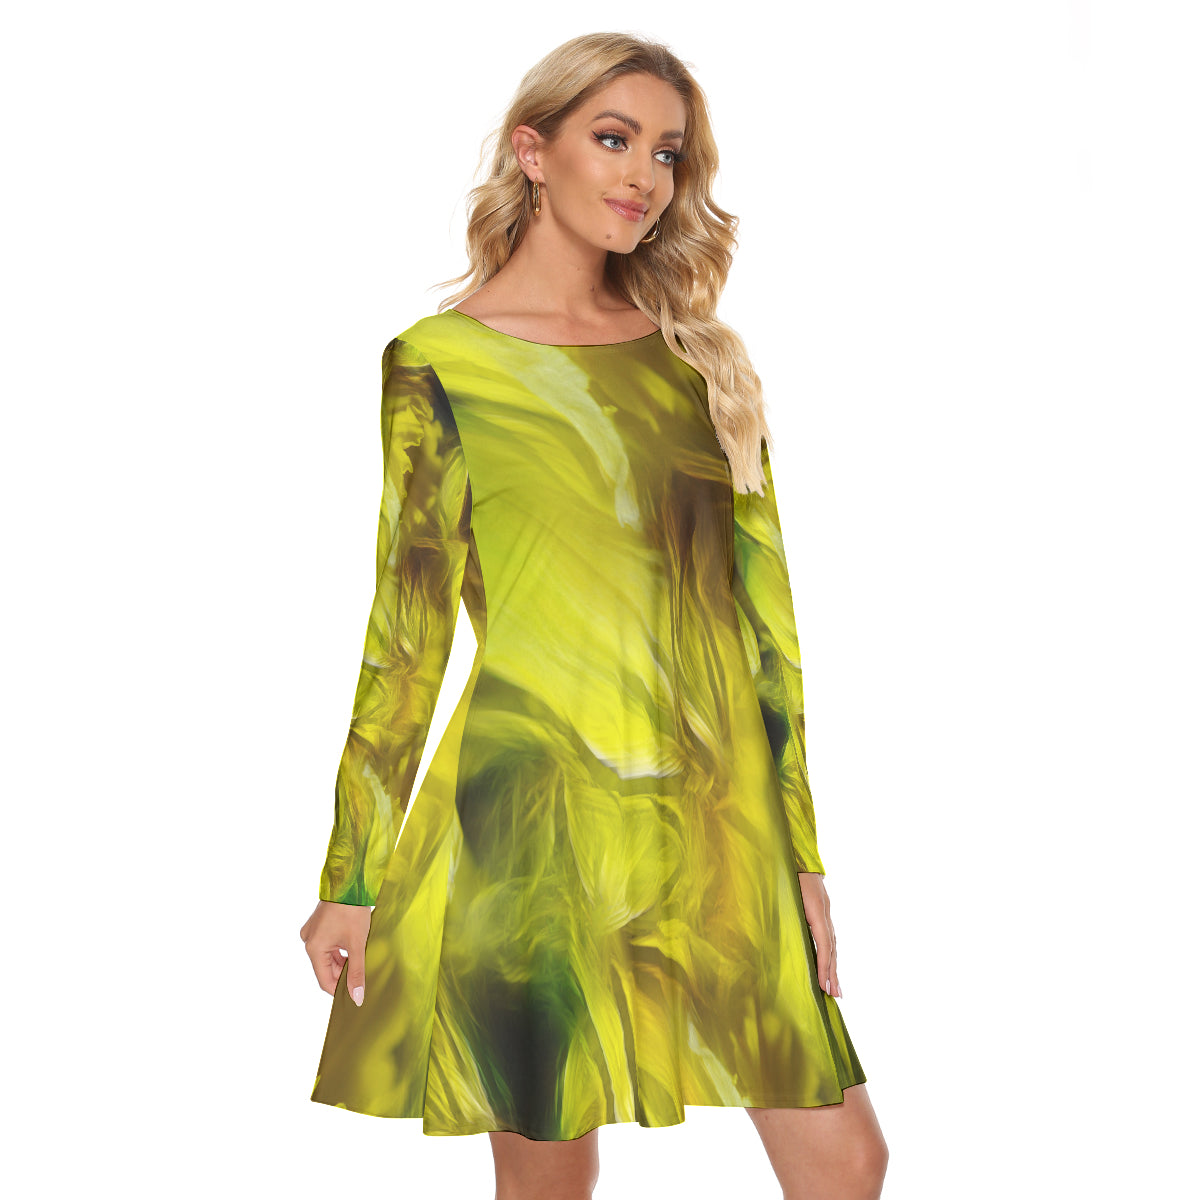 Yellow Daffodils All-Over Print Women's Crew Neck Dress